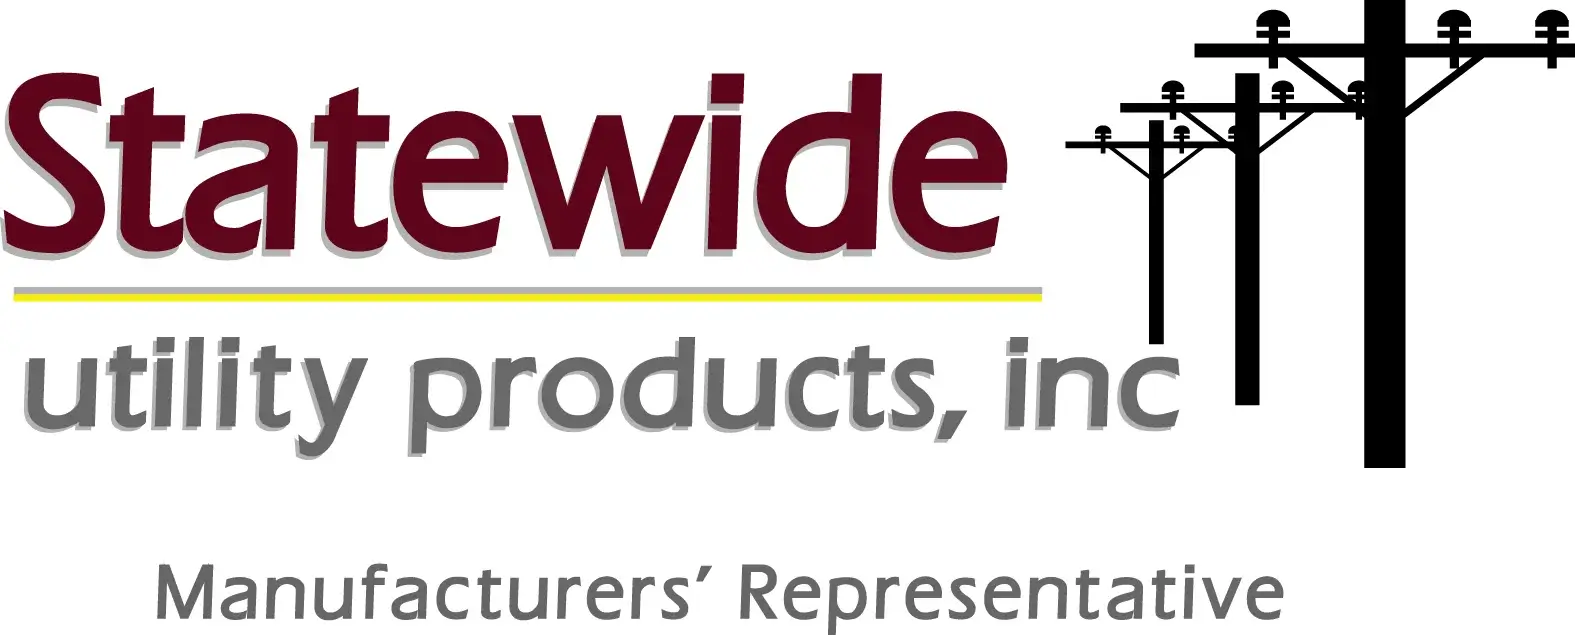 Statewide Utility Products, Inc